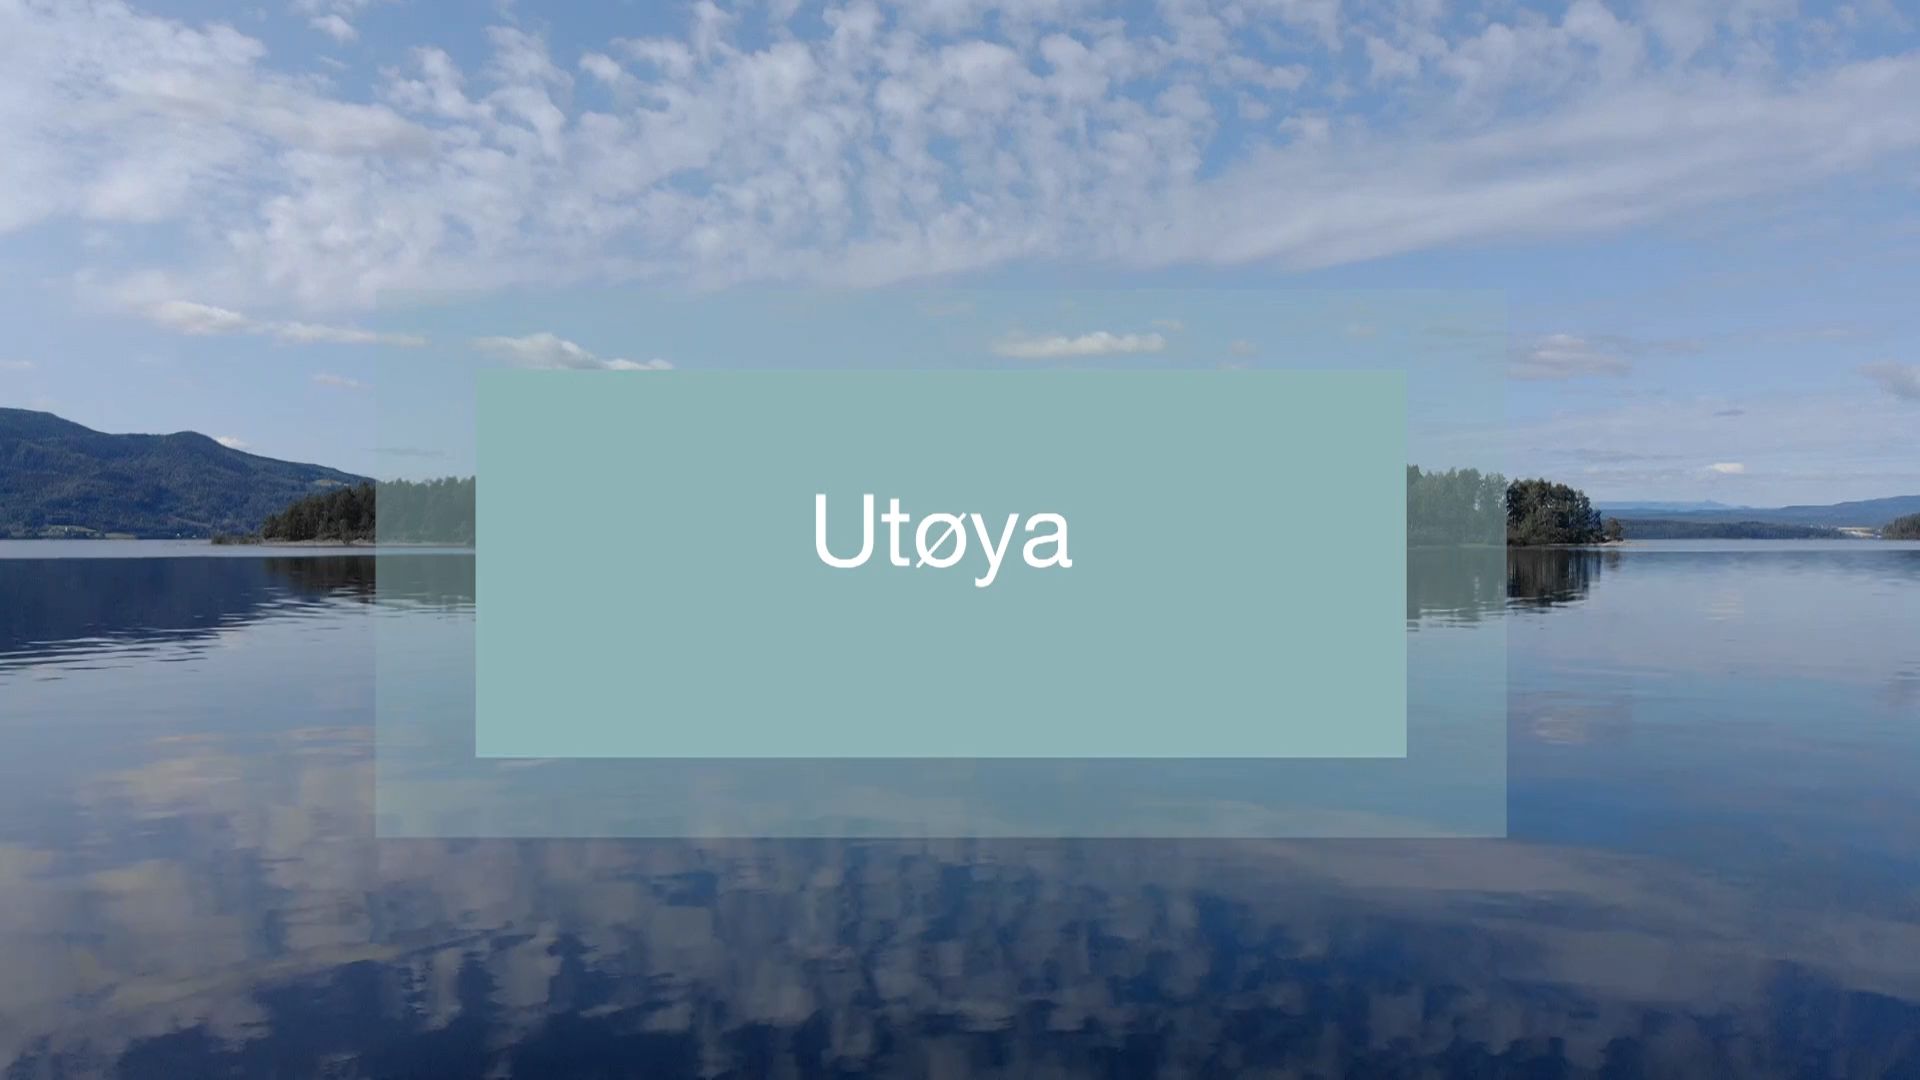 Photo of an island, with a blue poster above, which reads "Utøya".